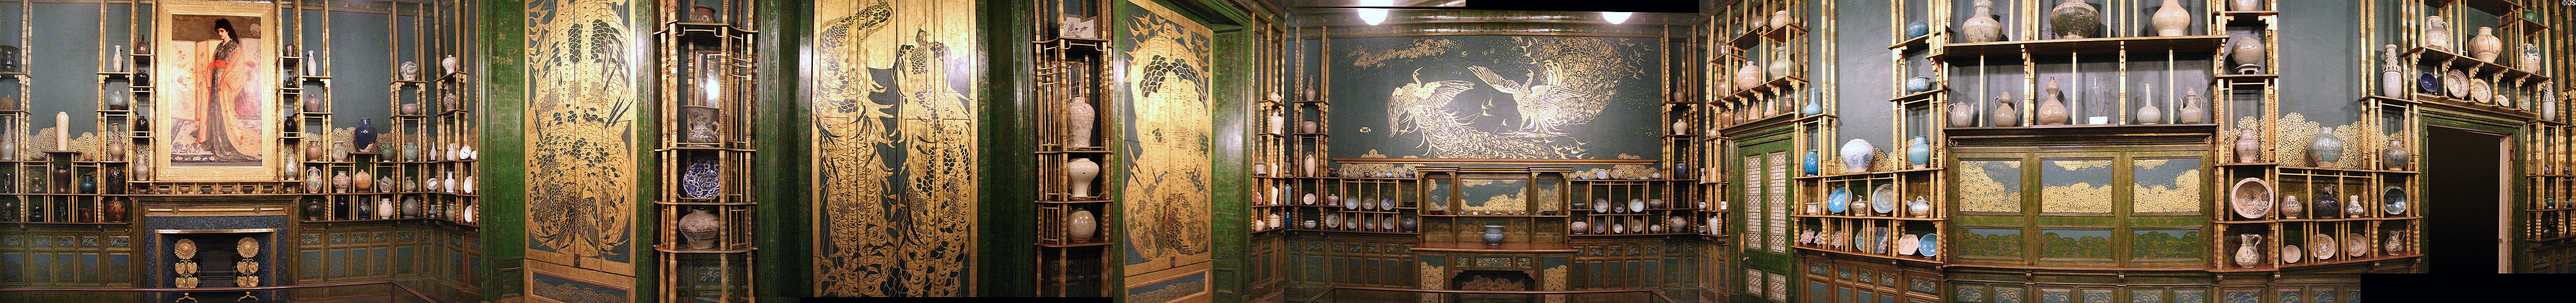 Panorama of Peacock Room (1876-7) designed by James McNeil Whistler & architect Thomas Jeckyll to display porcelain collection of Frederick Leyland in London at Smithsonian Freer Gallery of Art. Washington, DC.